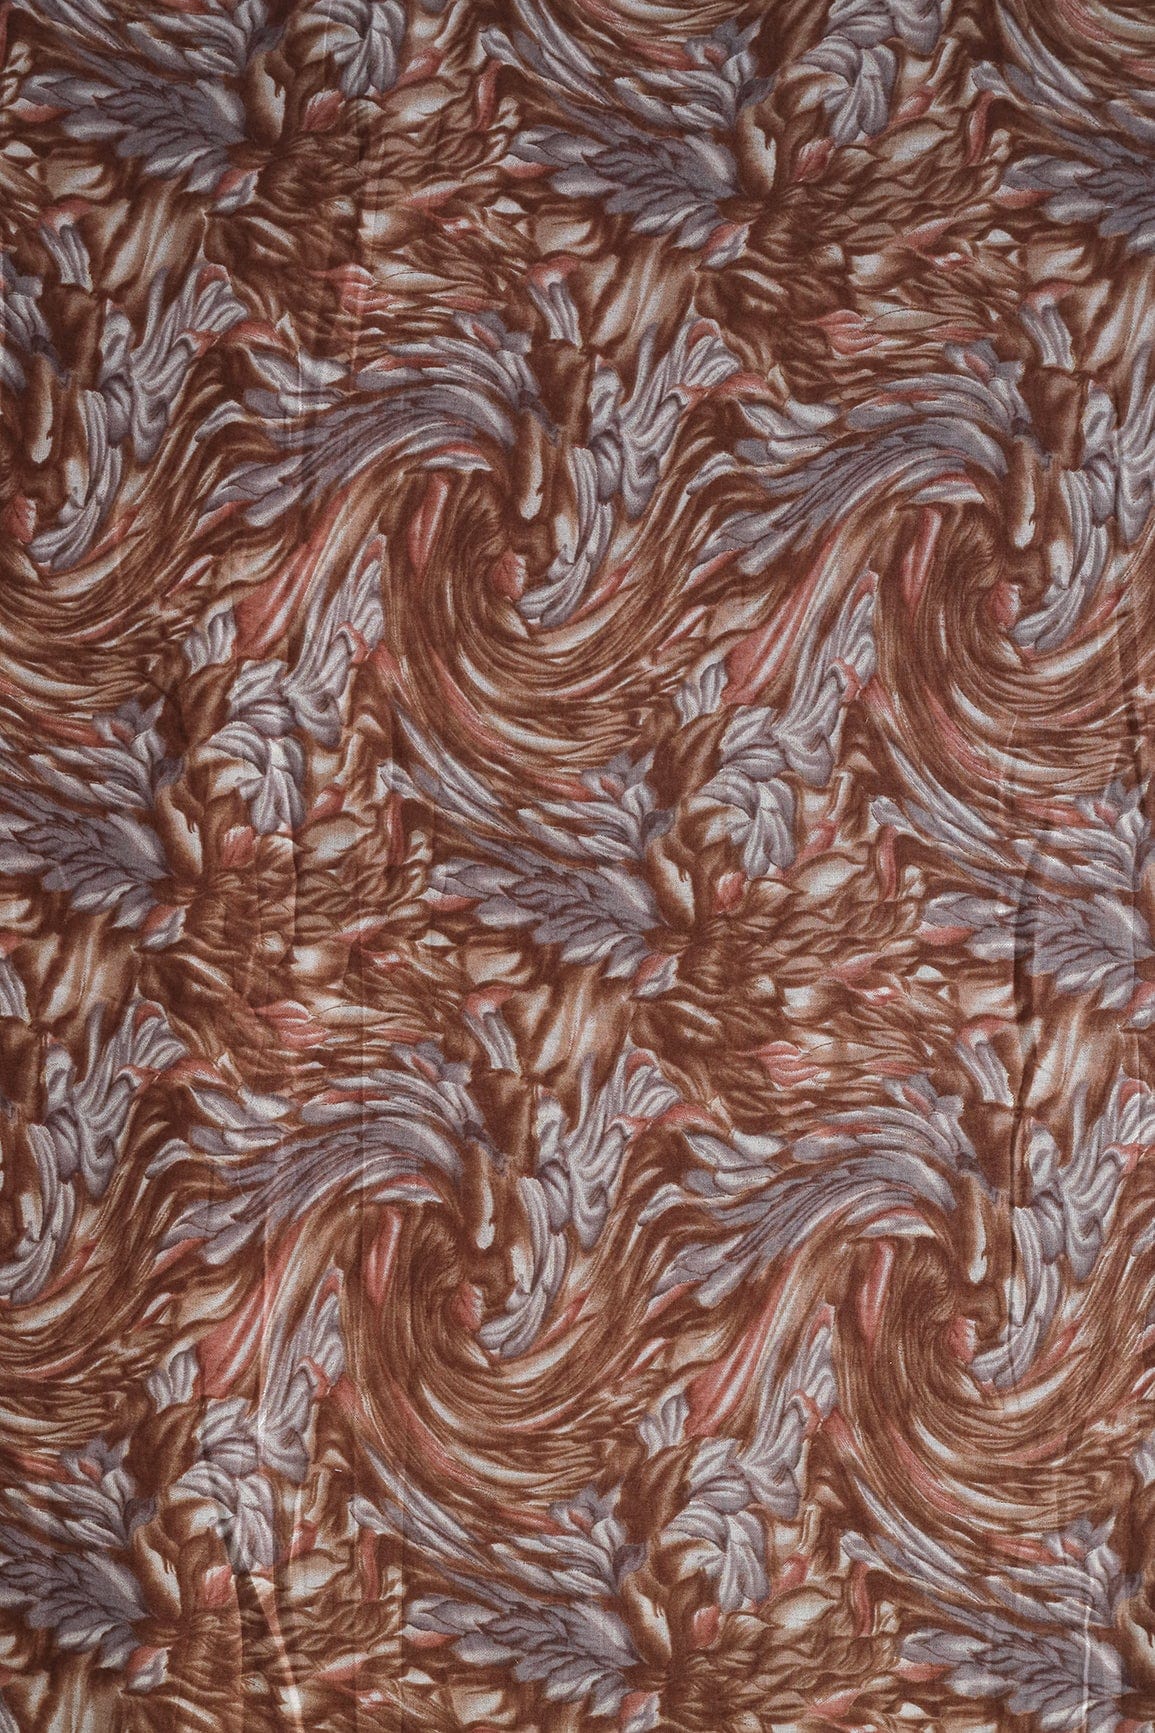 doeraa Prints Brown And Grey Abstract Pattern With Foil Print On Pure Mul Cotton Fabric